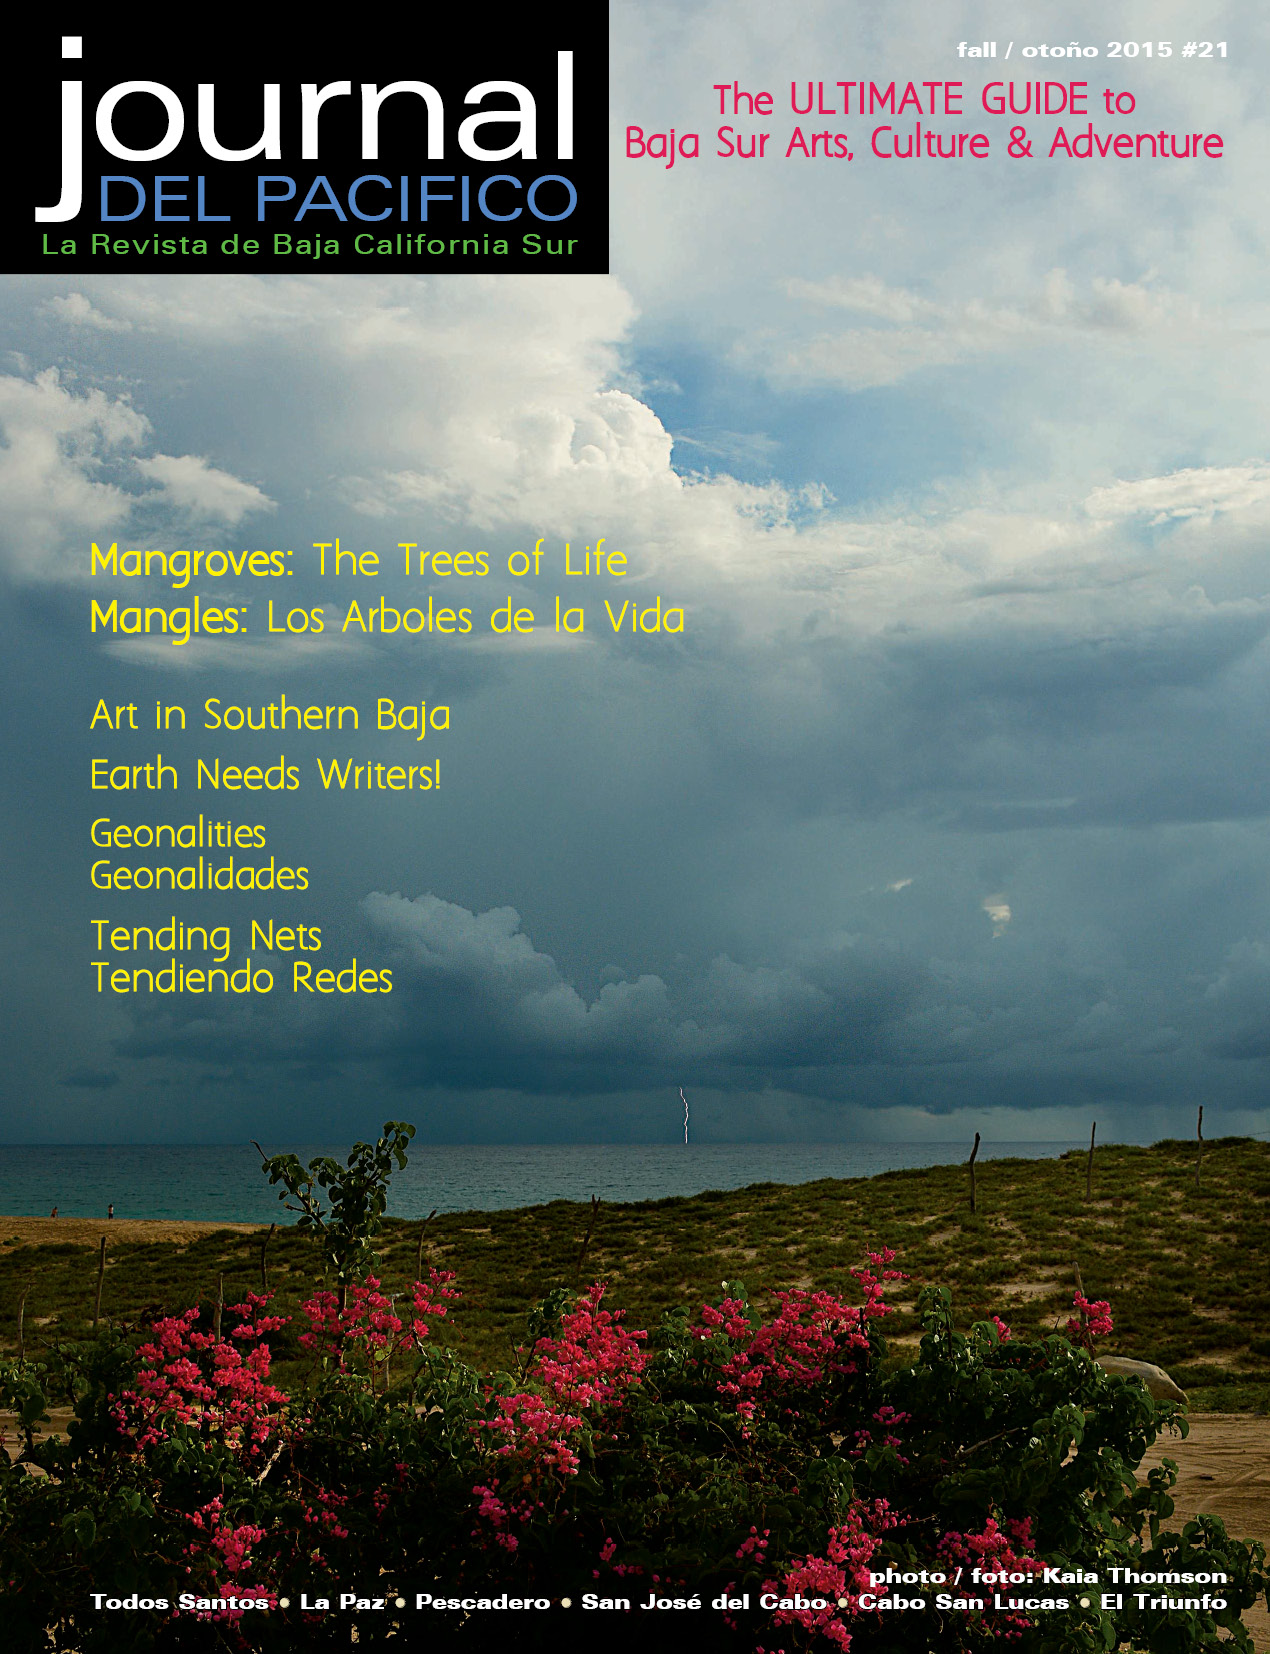 Fall 2015 Issue of Journal del Pacifico